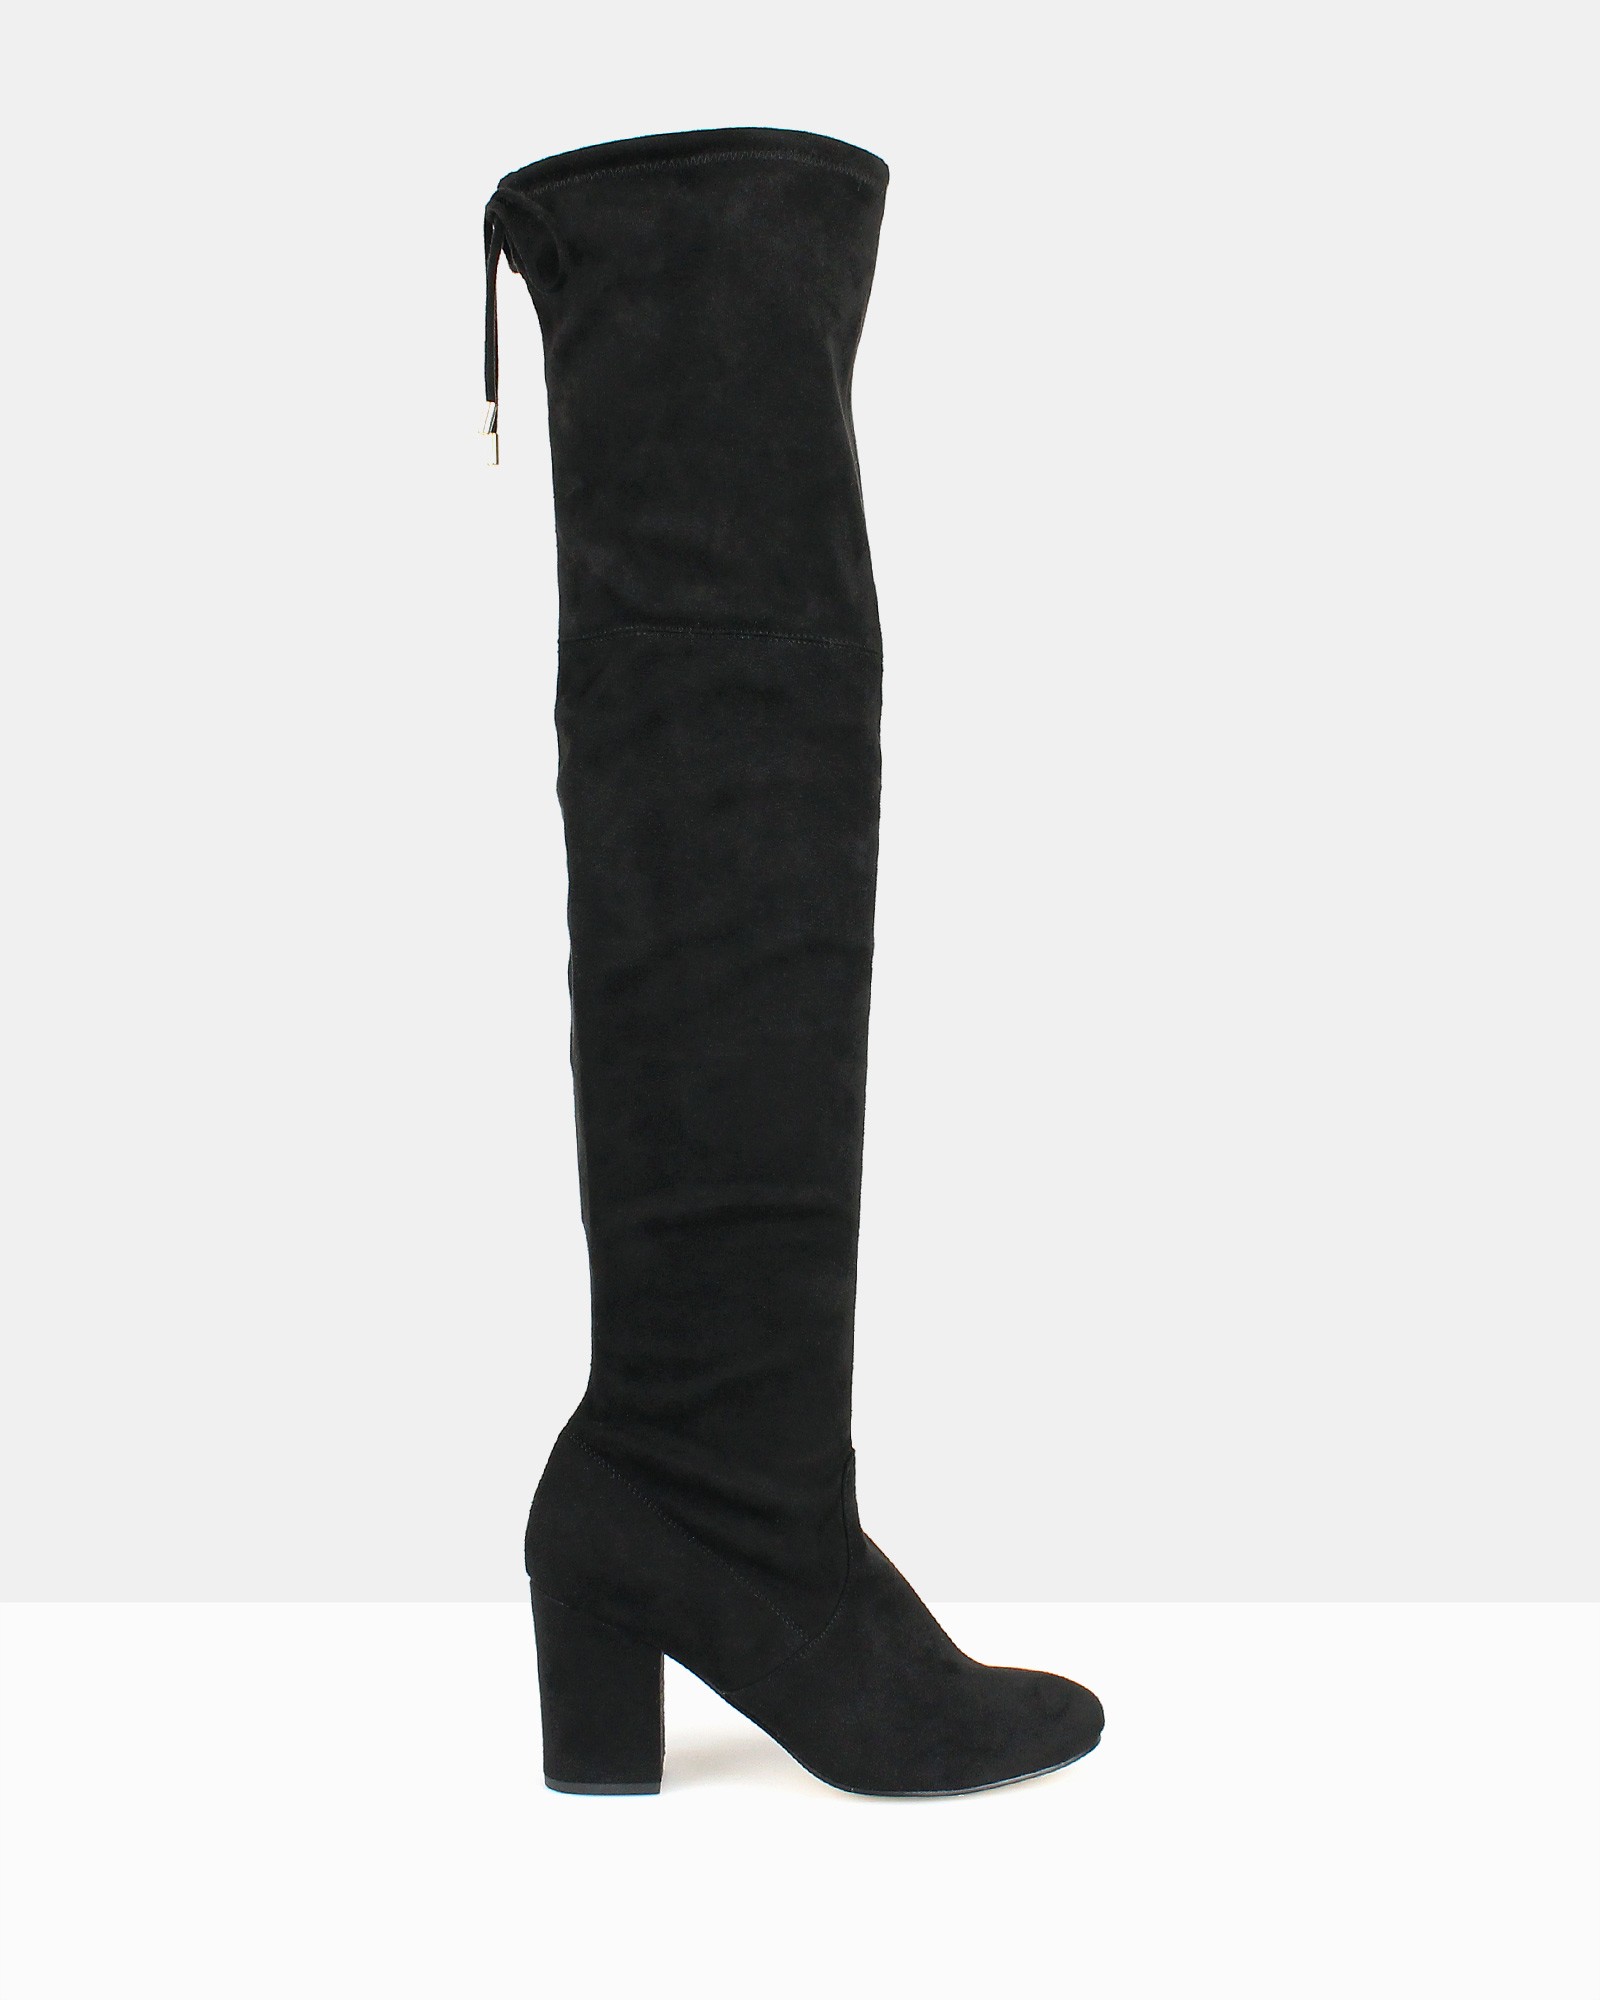 Bold Over-The-Knee Boots Black by Betts | ShoeSales